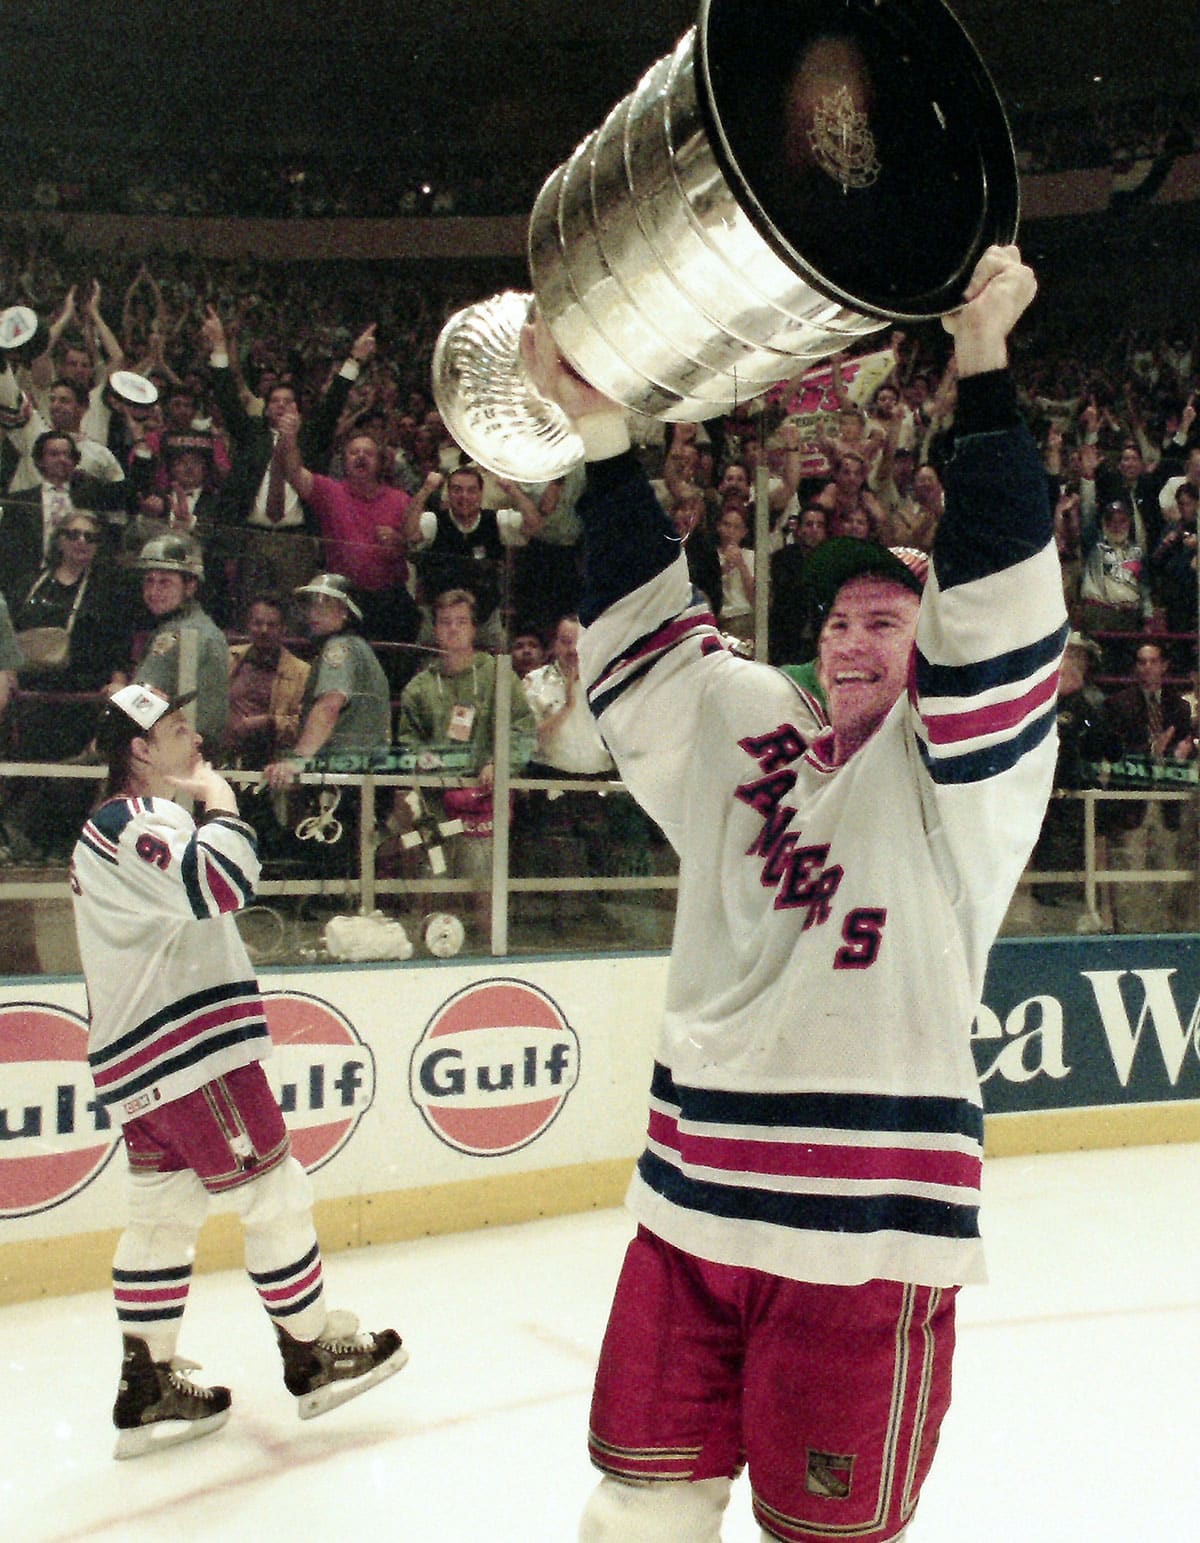 Rangers Mark Messier celebrates with the Stanley Cup after the Rangers defeated Vancouver 3-2 in game 7 of the Stanley Cup finals at Madison Square Garden June 14, 1994.